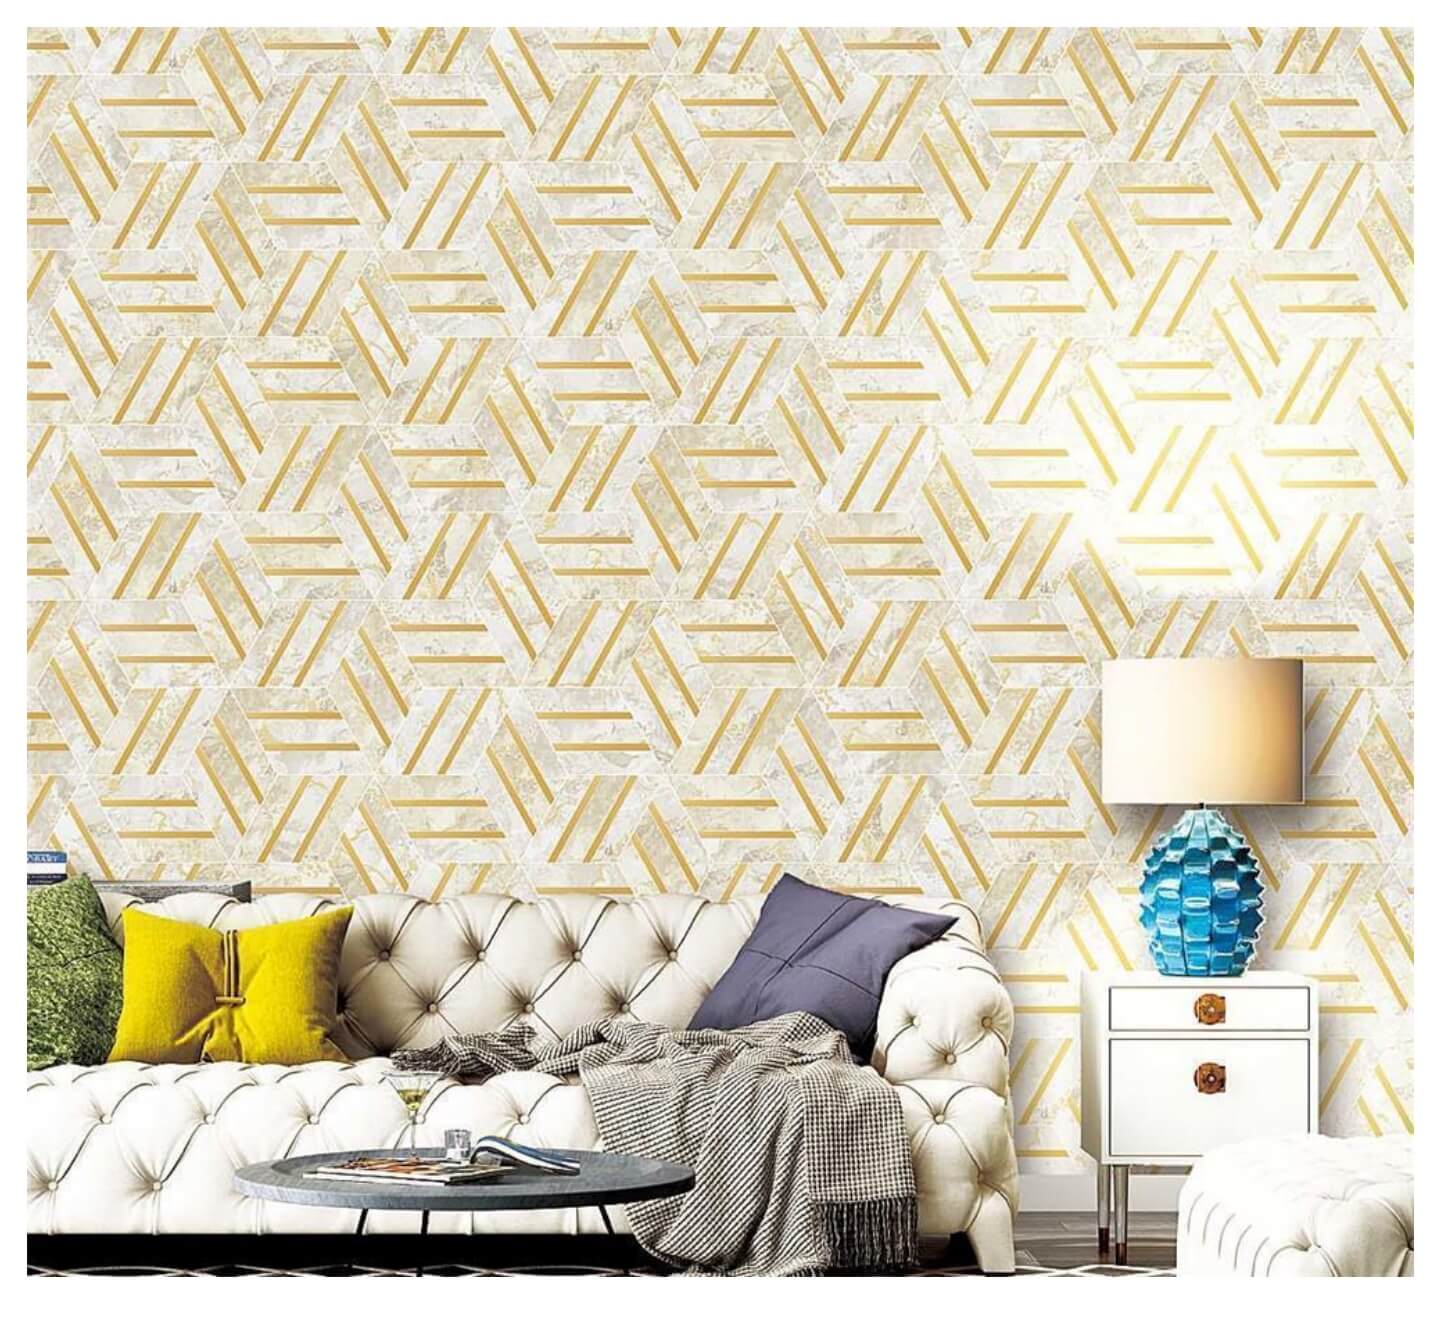 Beautiful Color 3D Design Wallpaper Better choice For Living Area, Bedroom, kids room, Office Durable PVC Wallpapers (29)